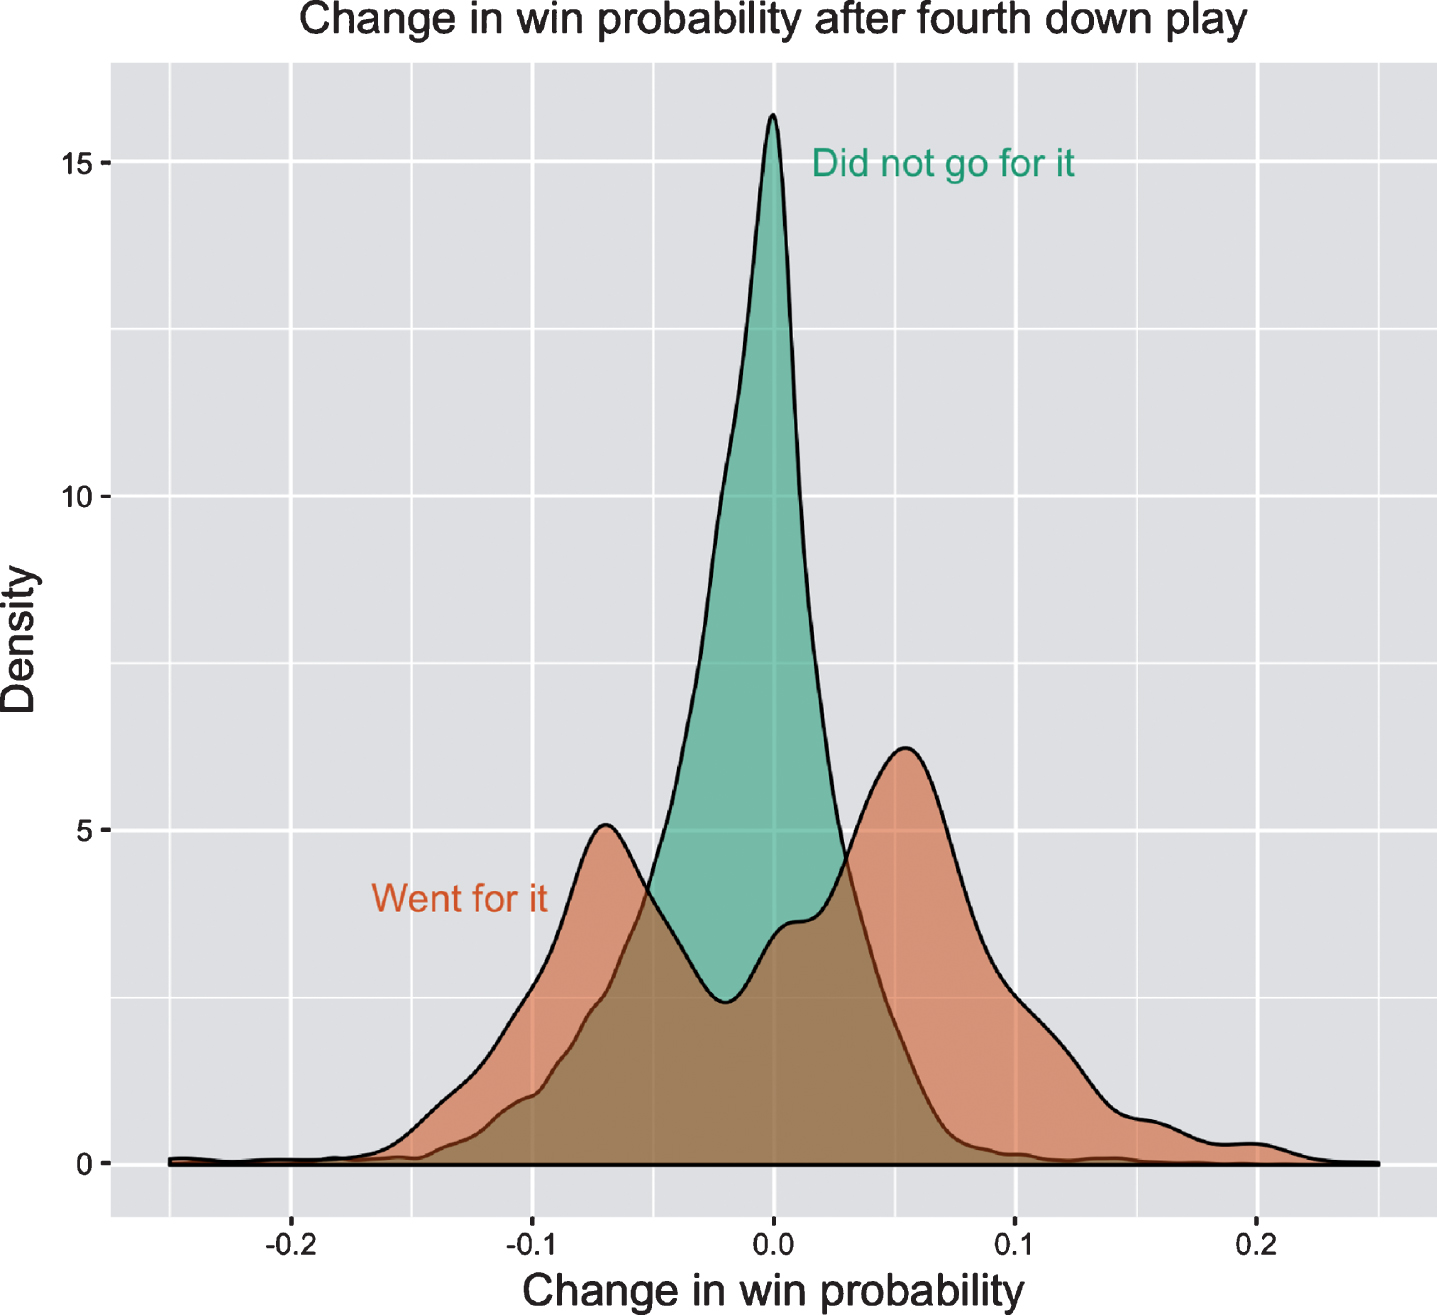 Density curves for the changes in win probability on all matched fourth down plays. The average change in win probability for teams that went for it is about 1.9% higher than for teams that did not go for it (See Equation (2)). However, going for it also involves a larger variance in win probability changes, relative to not going for it.